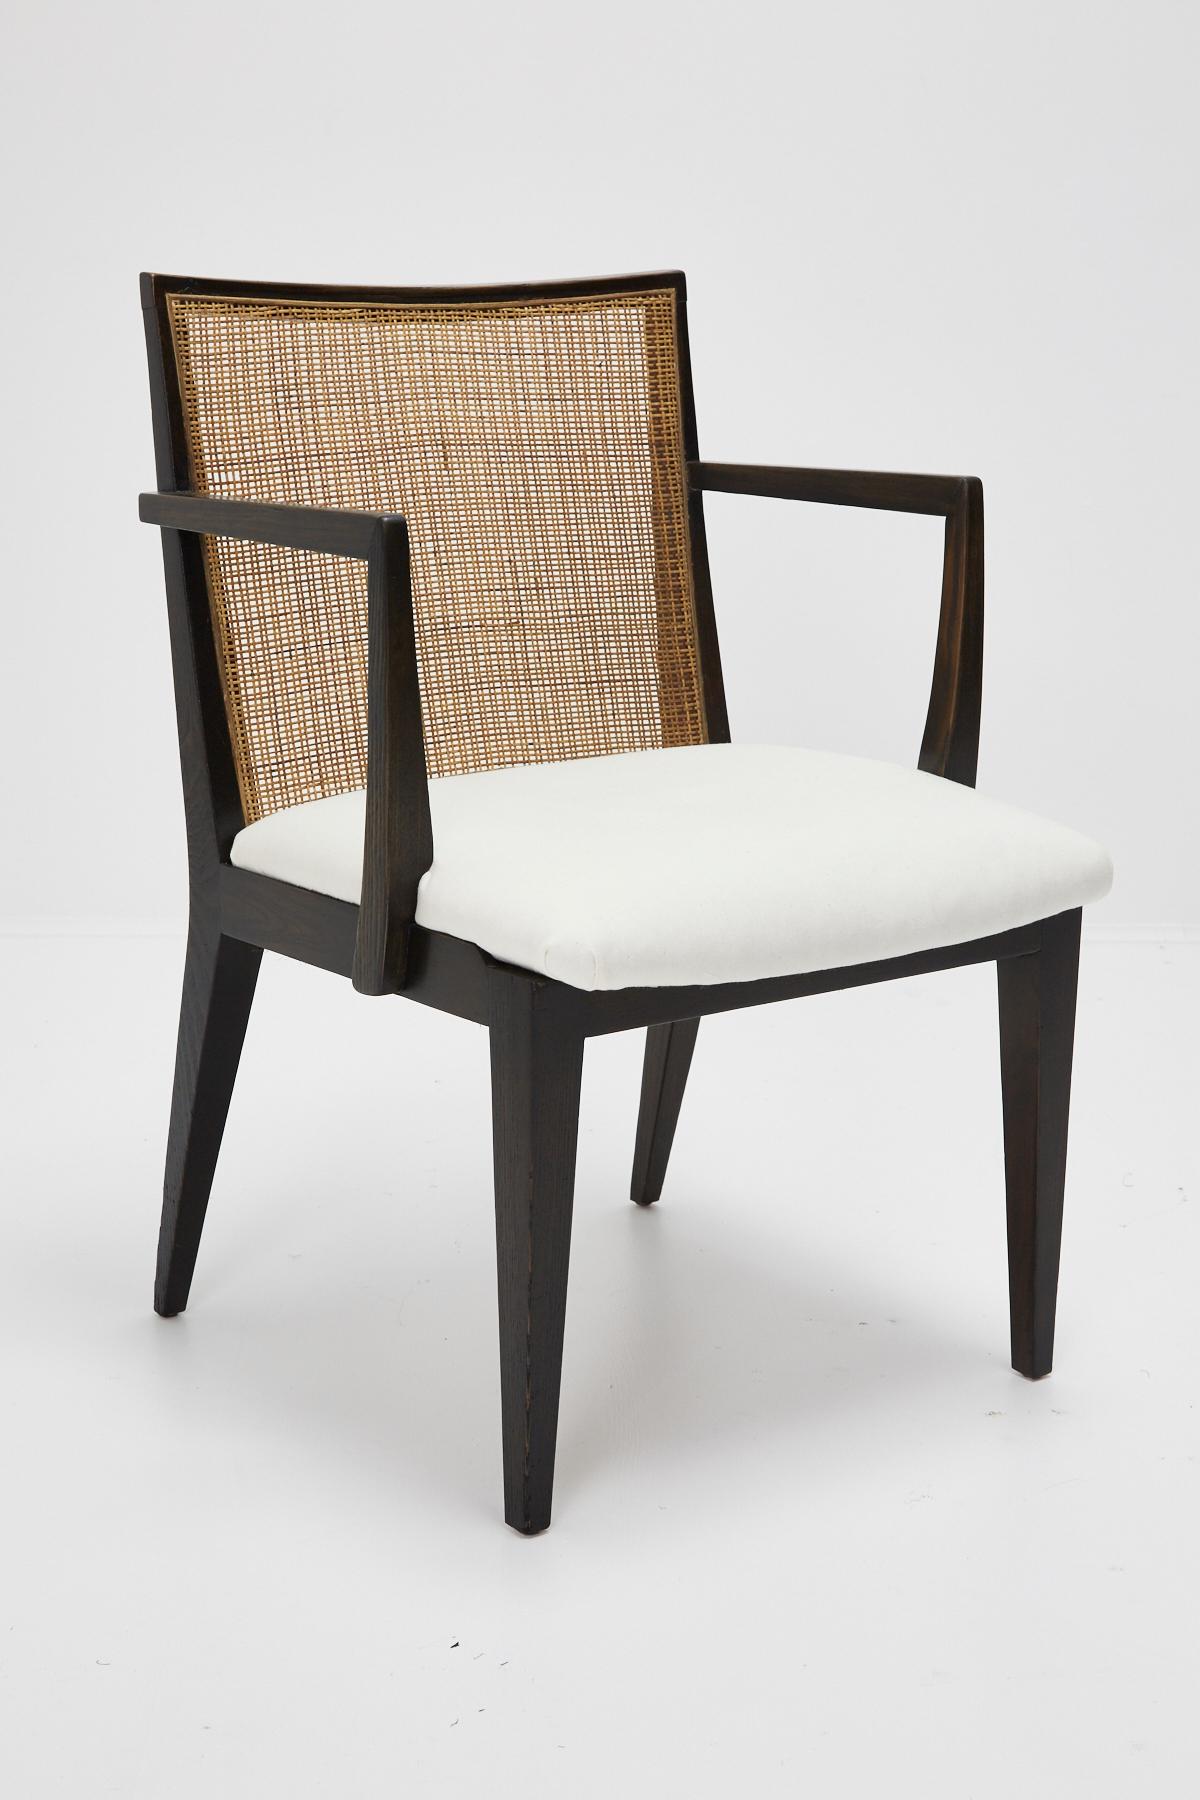 American Set of Four Armchairs by Edward Wormley for Dunbar, ca. 1959